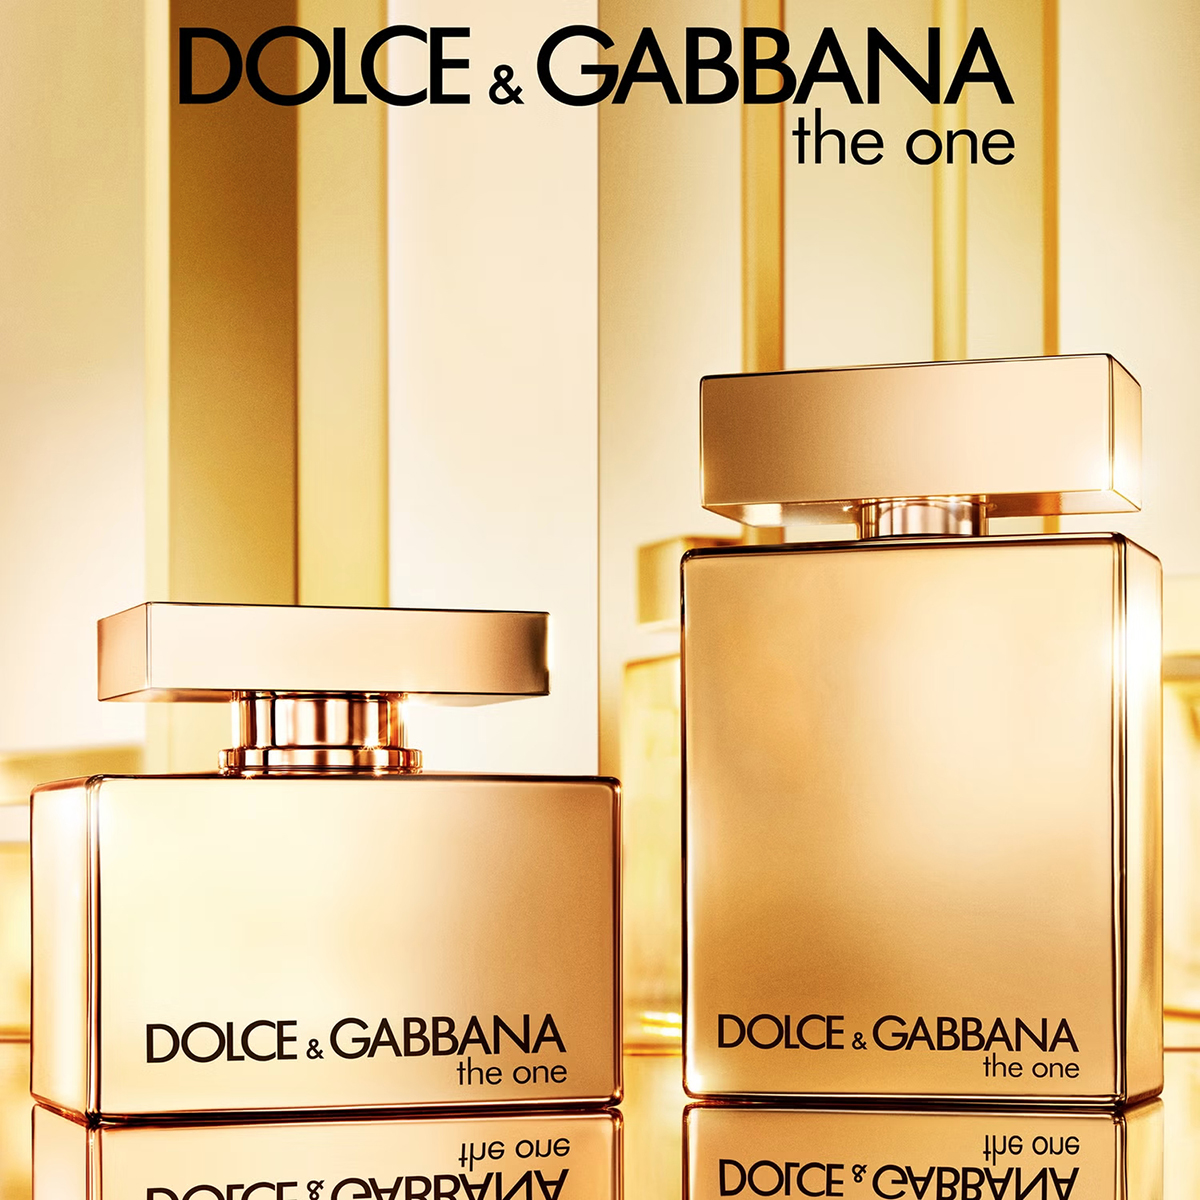 New launches from Dolce&Gabbana at Lookfantastic